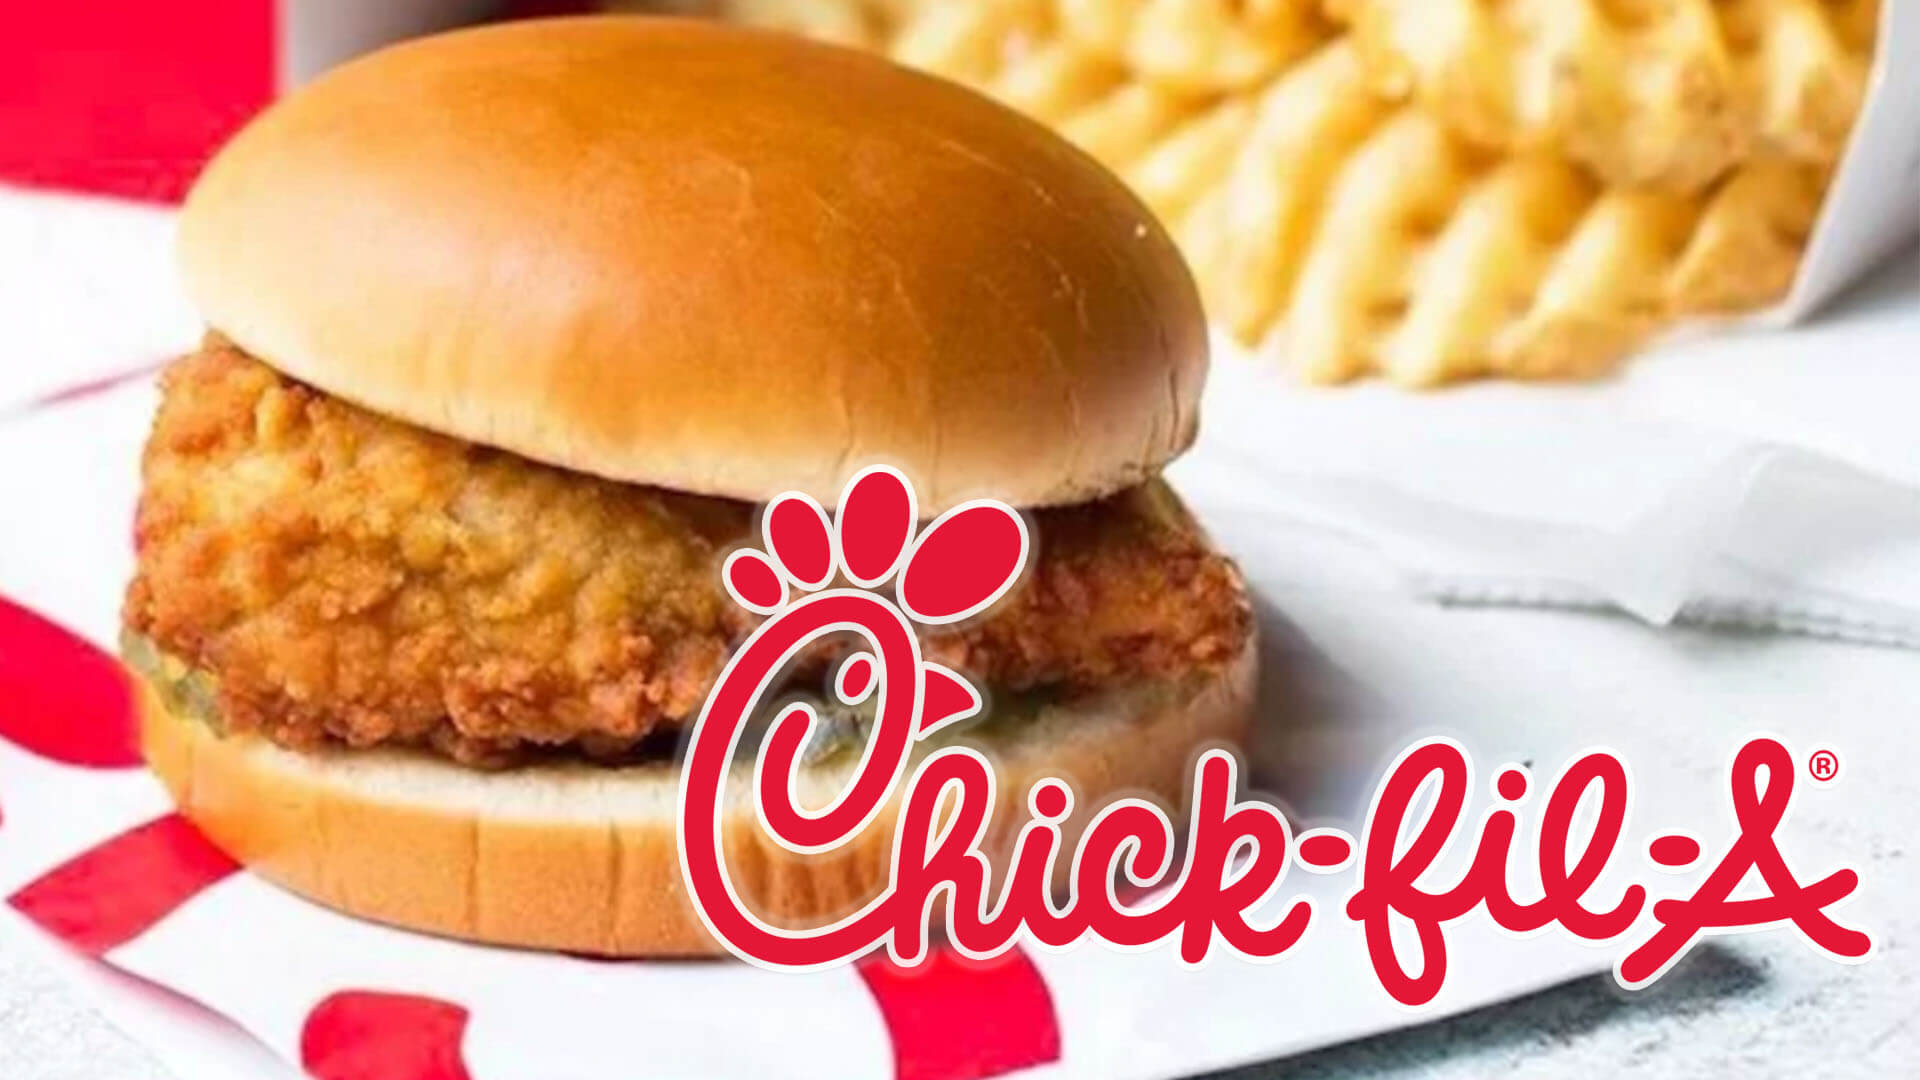 Chick-Fil-A to Launch Vegan Chicken Options